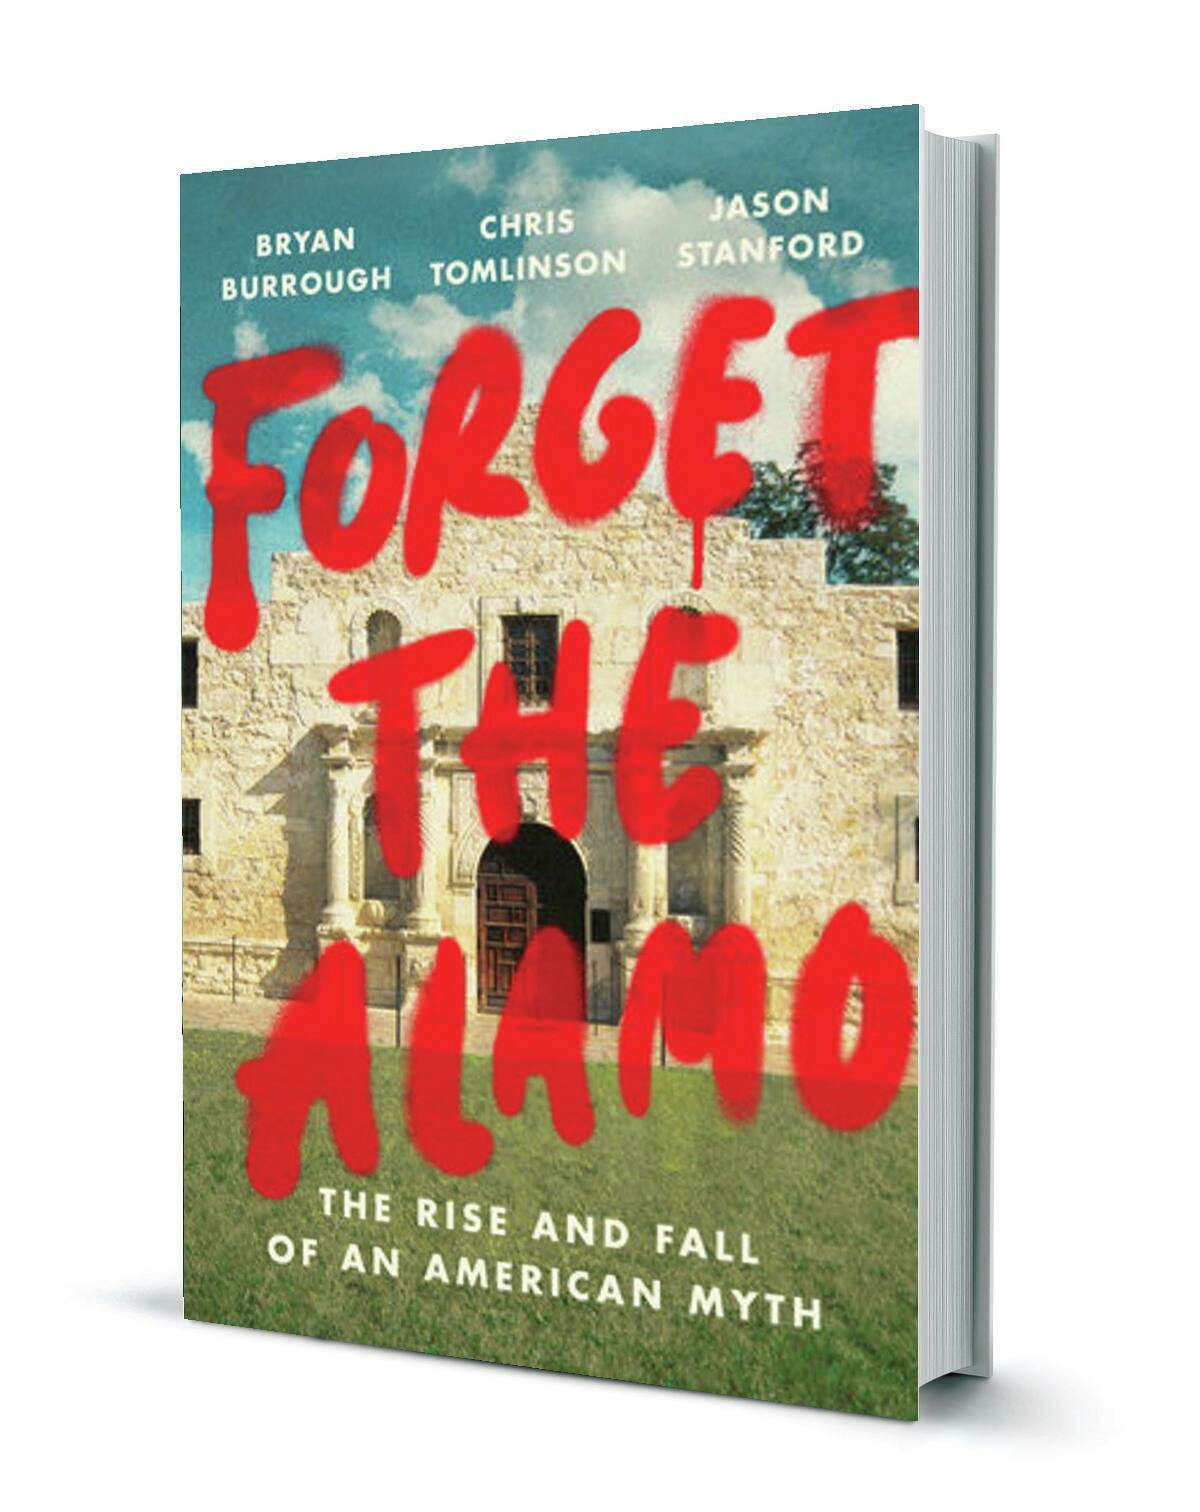 Lt. Gov. Dan Patrick canceled a reading of “Forget the Alamo: The Rise and Fall of an American Myth.”